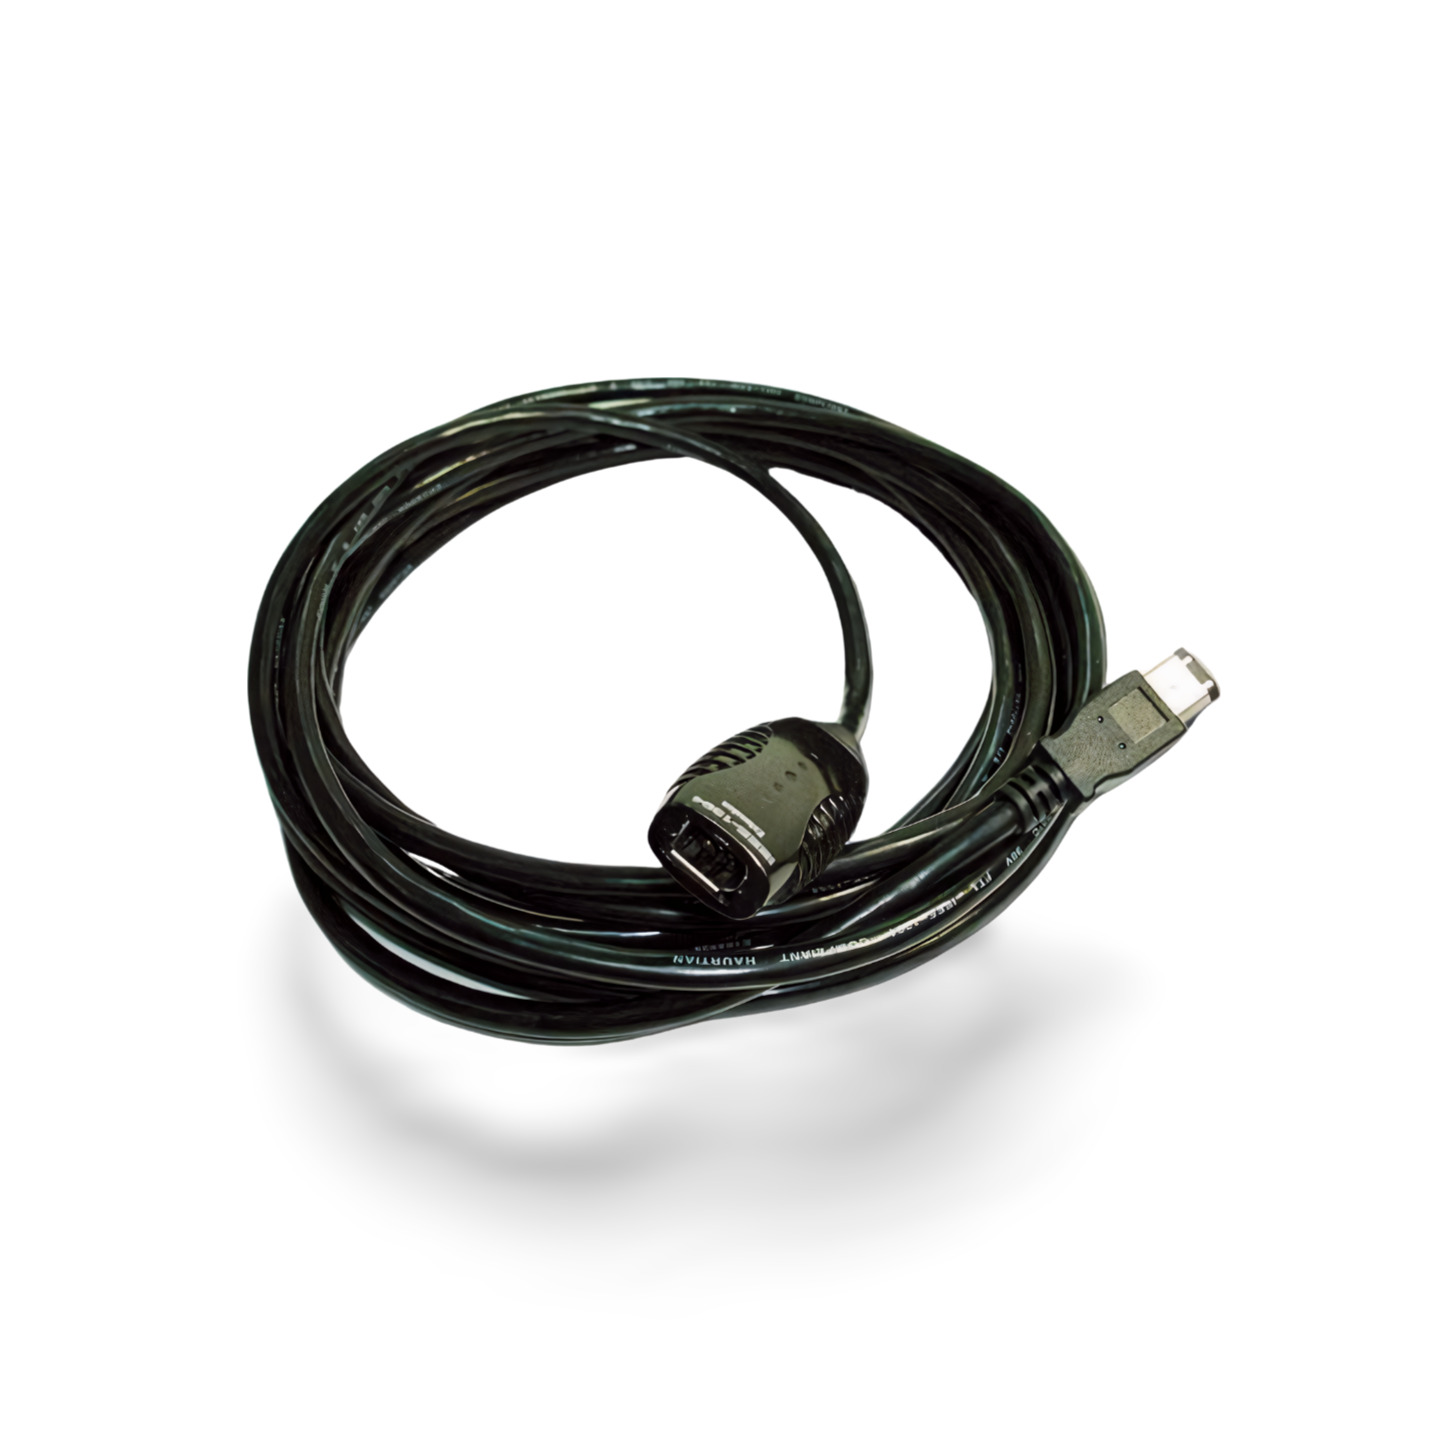 16.40ft Firewire Repeater Extension Cable IEEE-1394a 6 Pin - Black